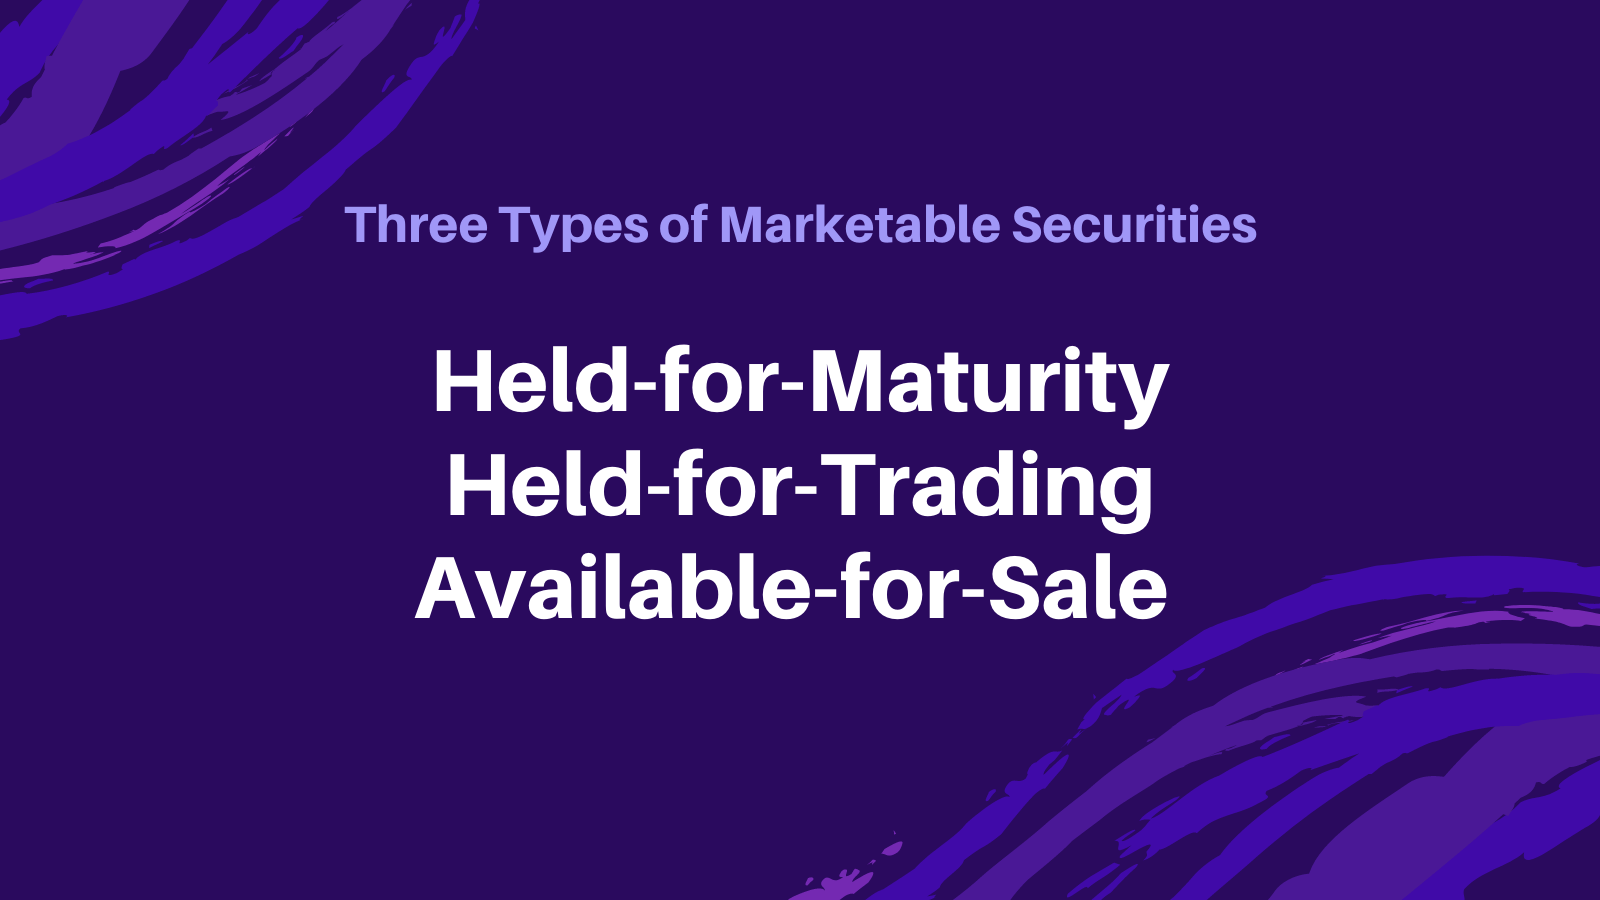 held for maturity and held for trading and available for sale, types of marketable securities